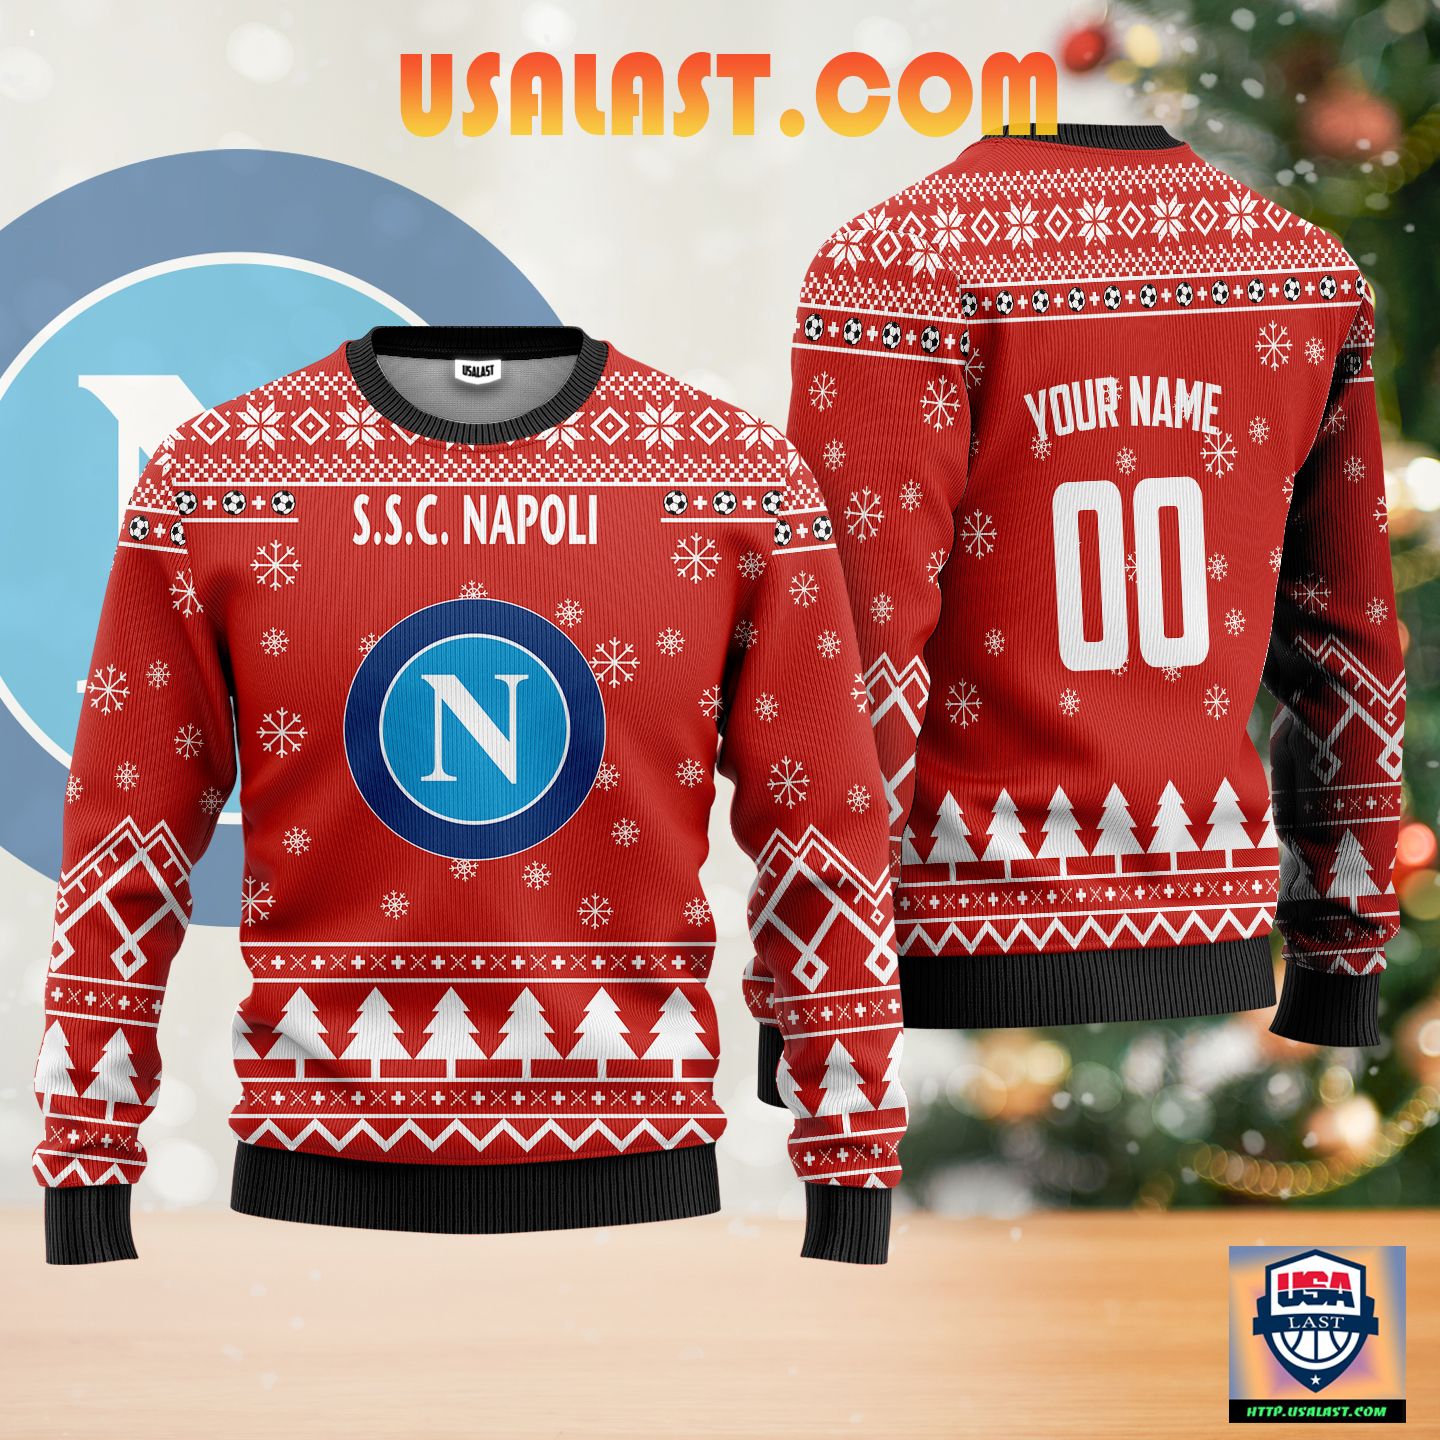 Best Sale S.S.C Napoli Personalized Ugly Christmas Sweater Red Version